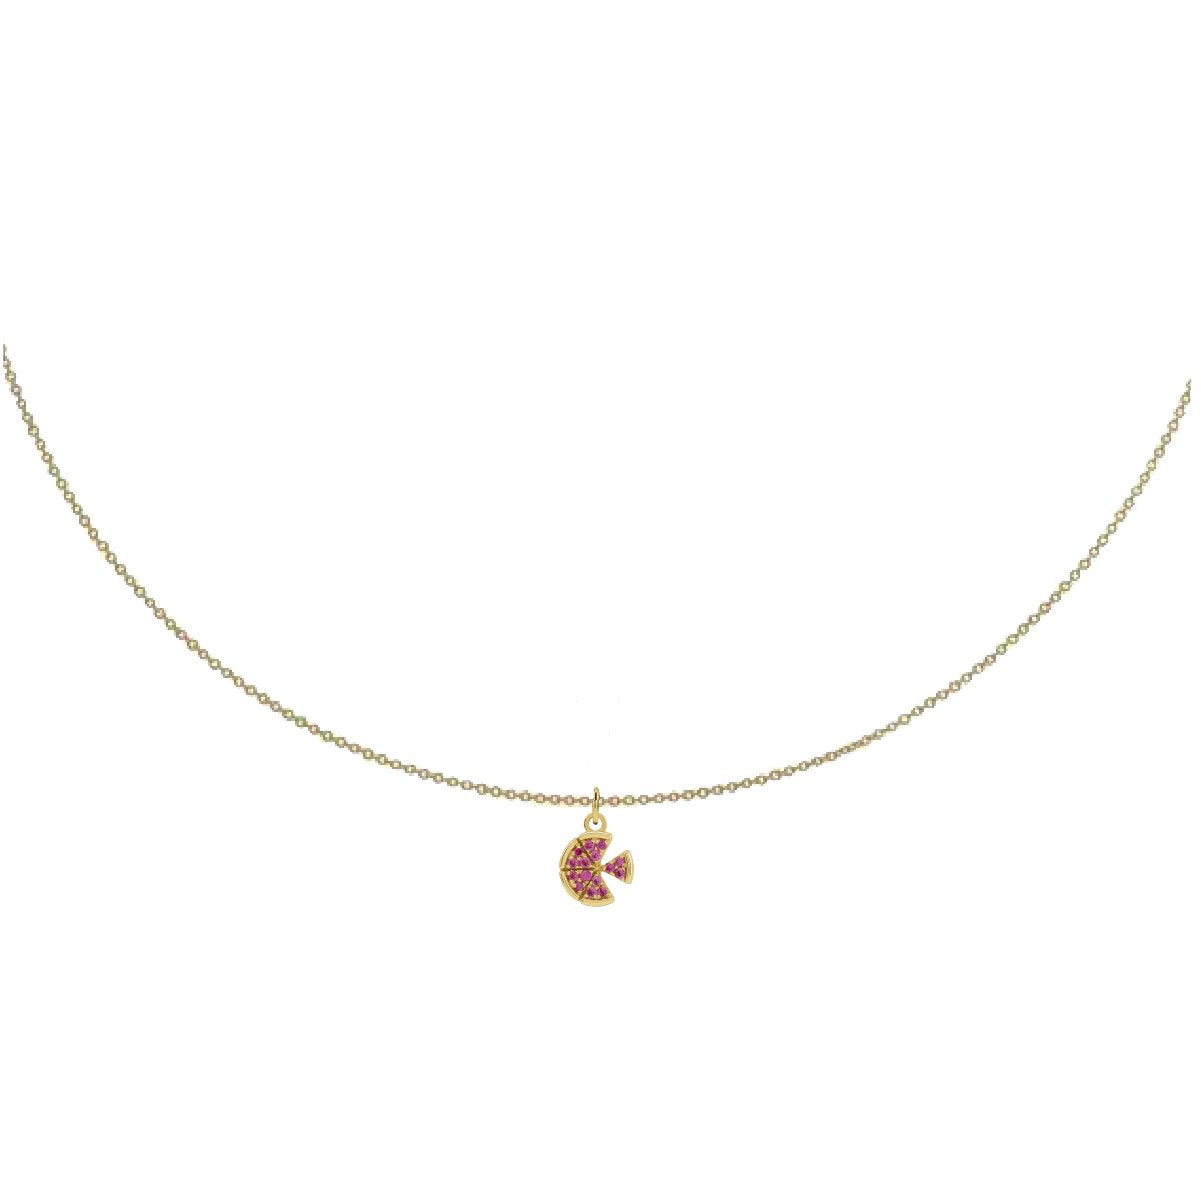 Charm Collection - For the Pie Lover Robyn Canady Charm + 14K Gold Filled Chain None 